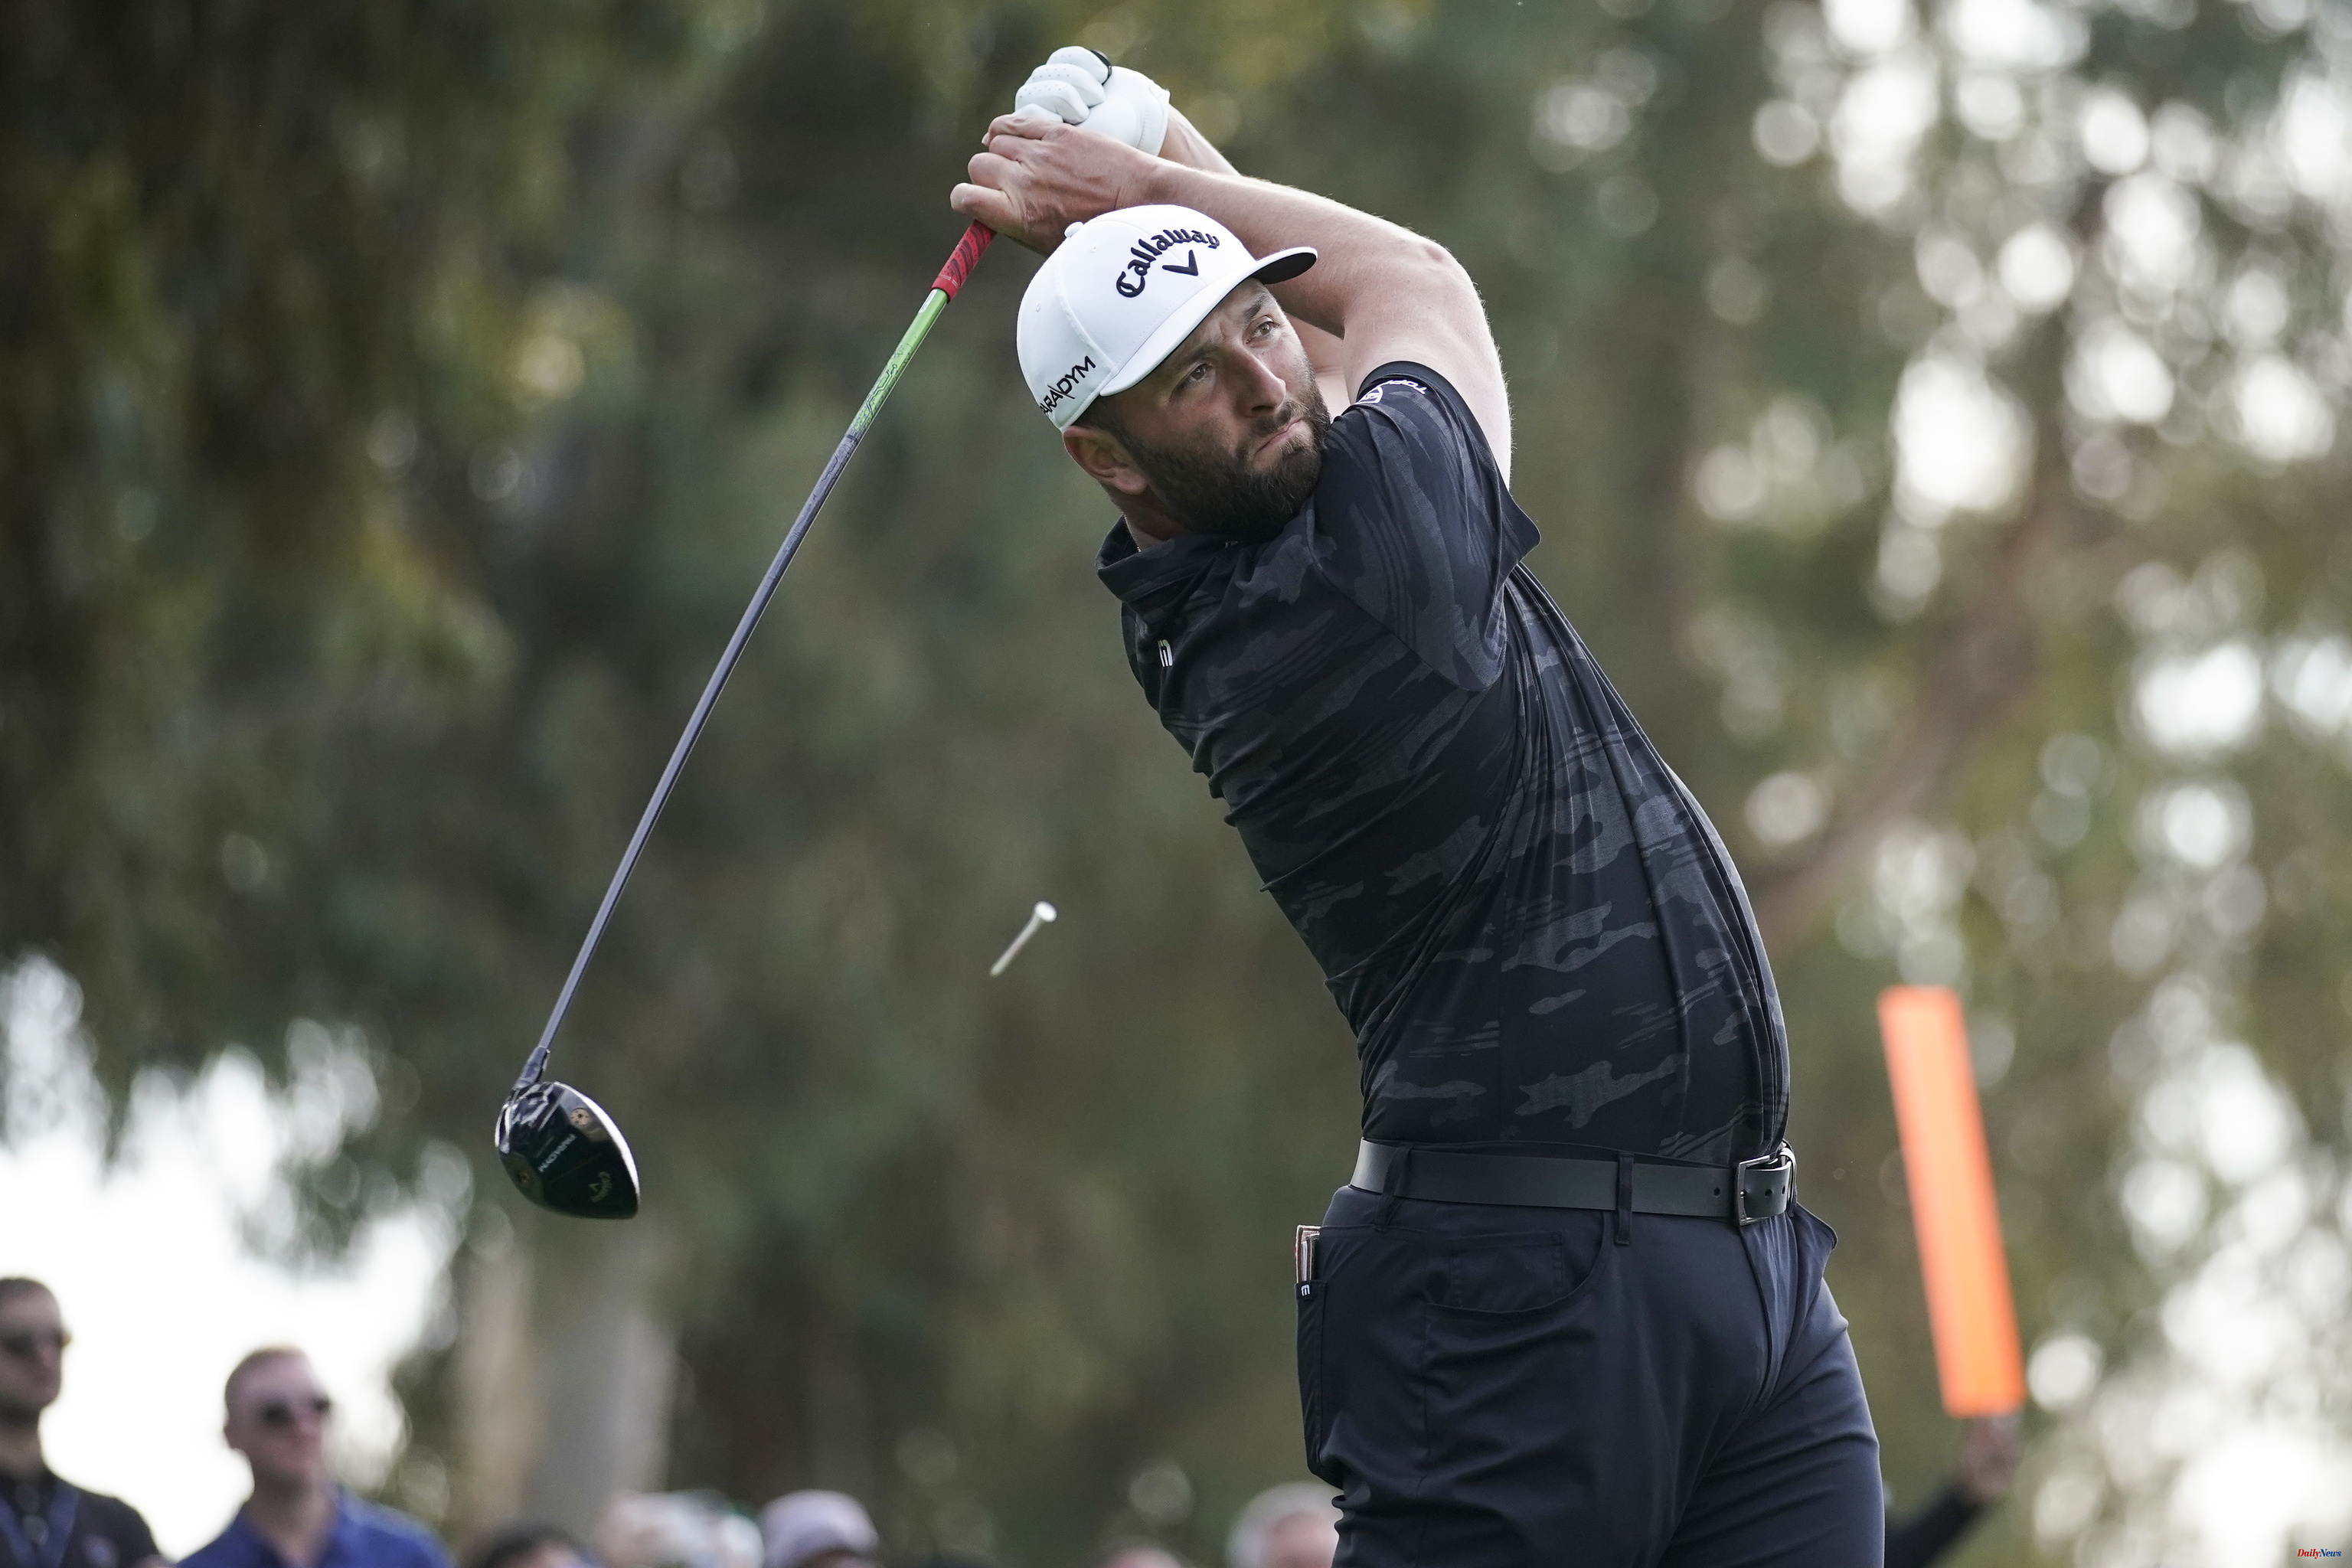 Golf Jon Rahm is resurrected to fight for the Genesis win as Tiger makes the cut in pain